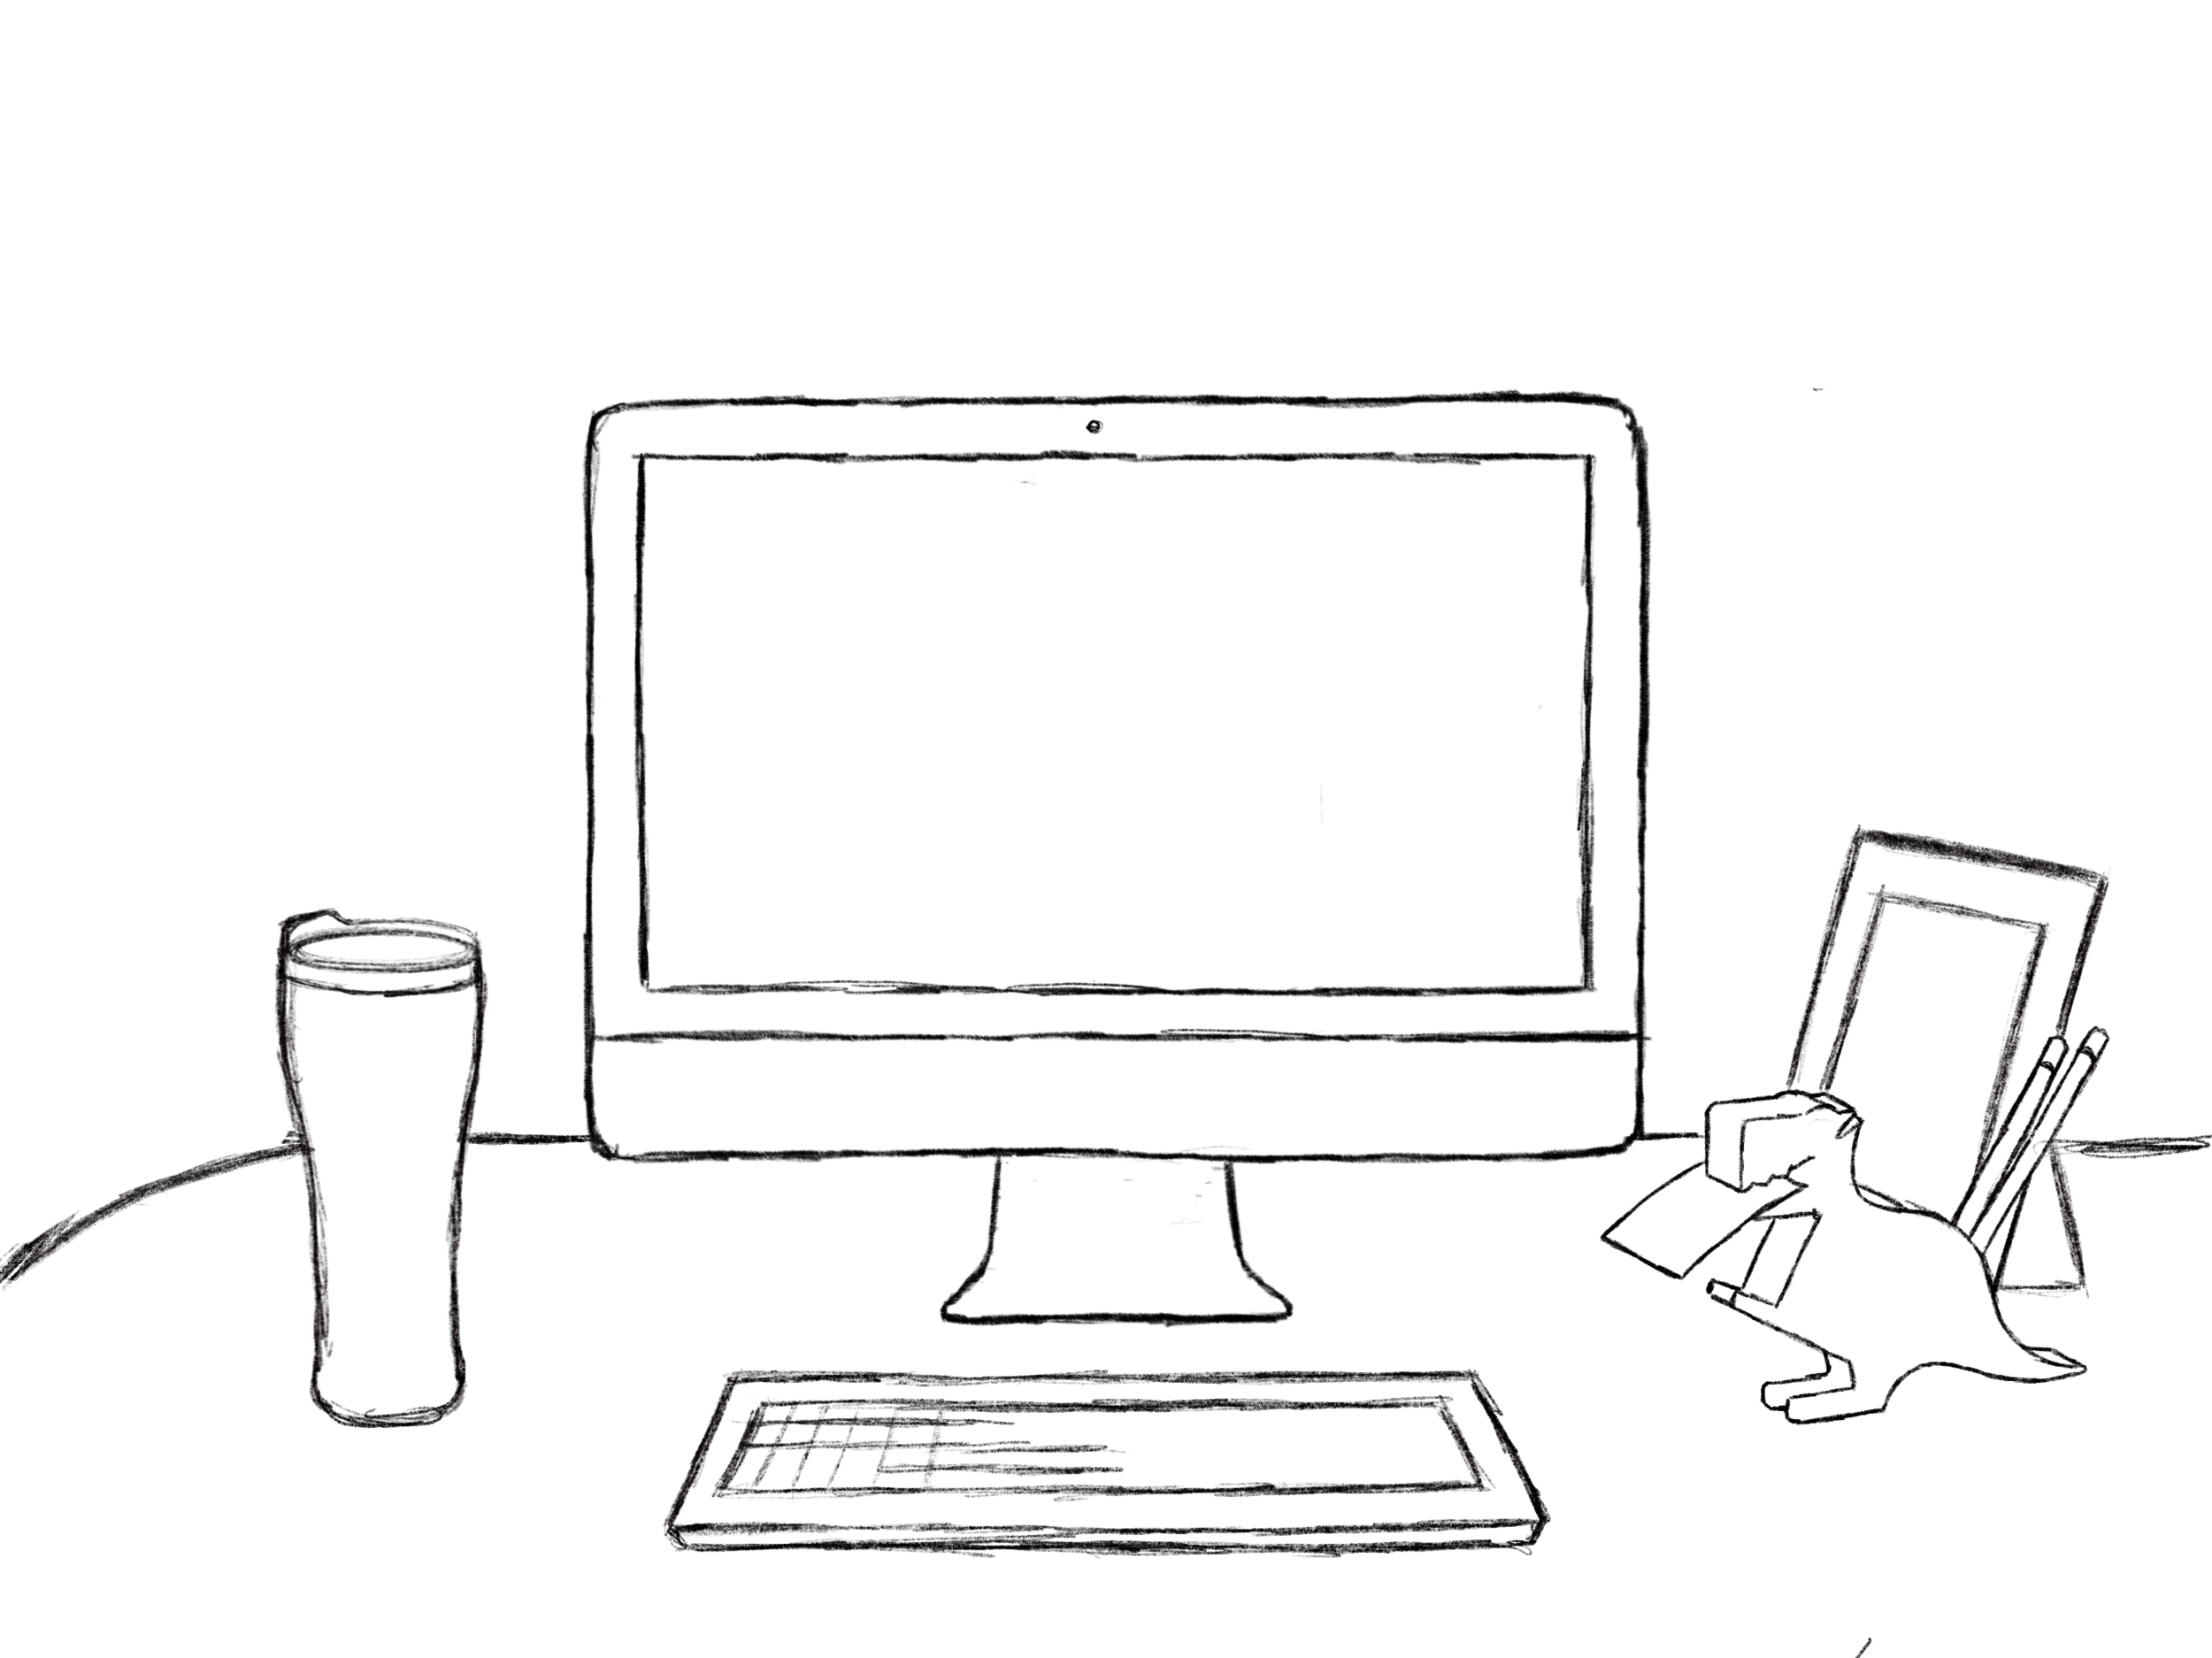 andy-workstation-1.png